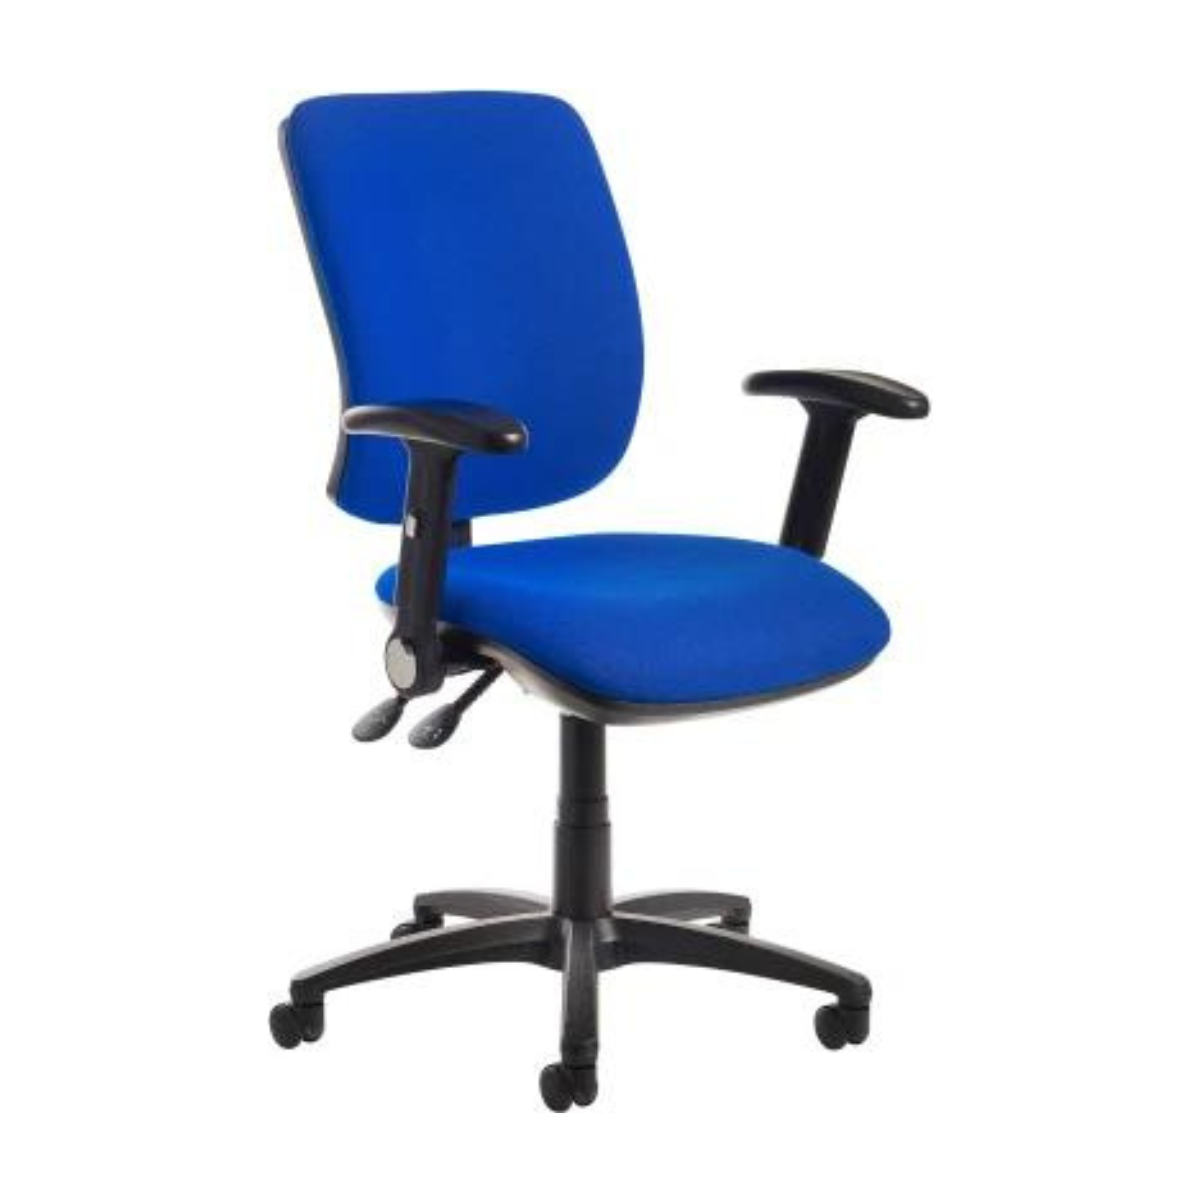 Senza 3 lever swivel chair with HA Back and arms   12/04/21